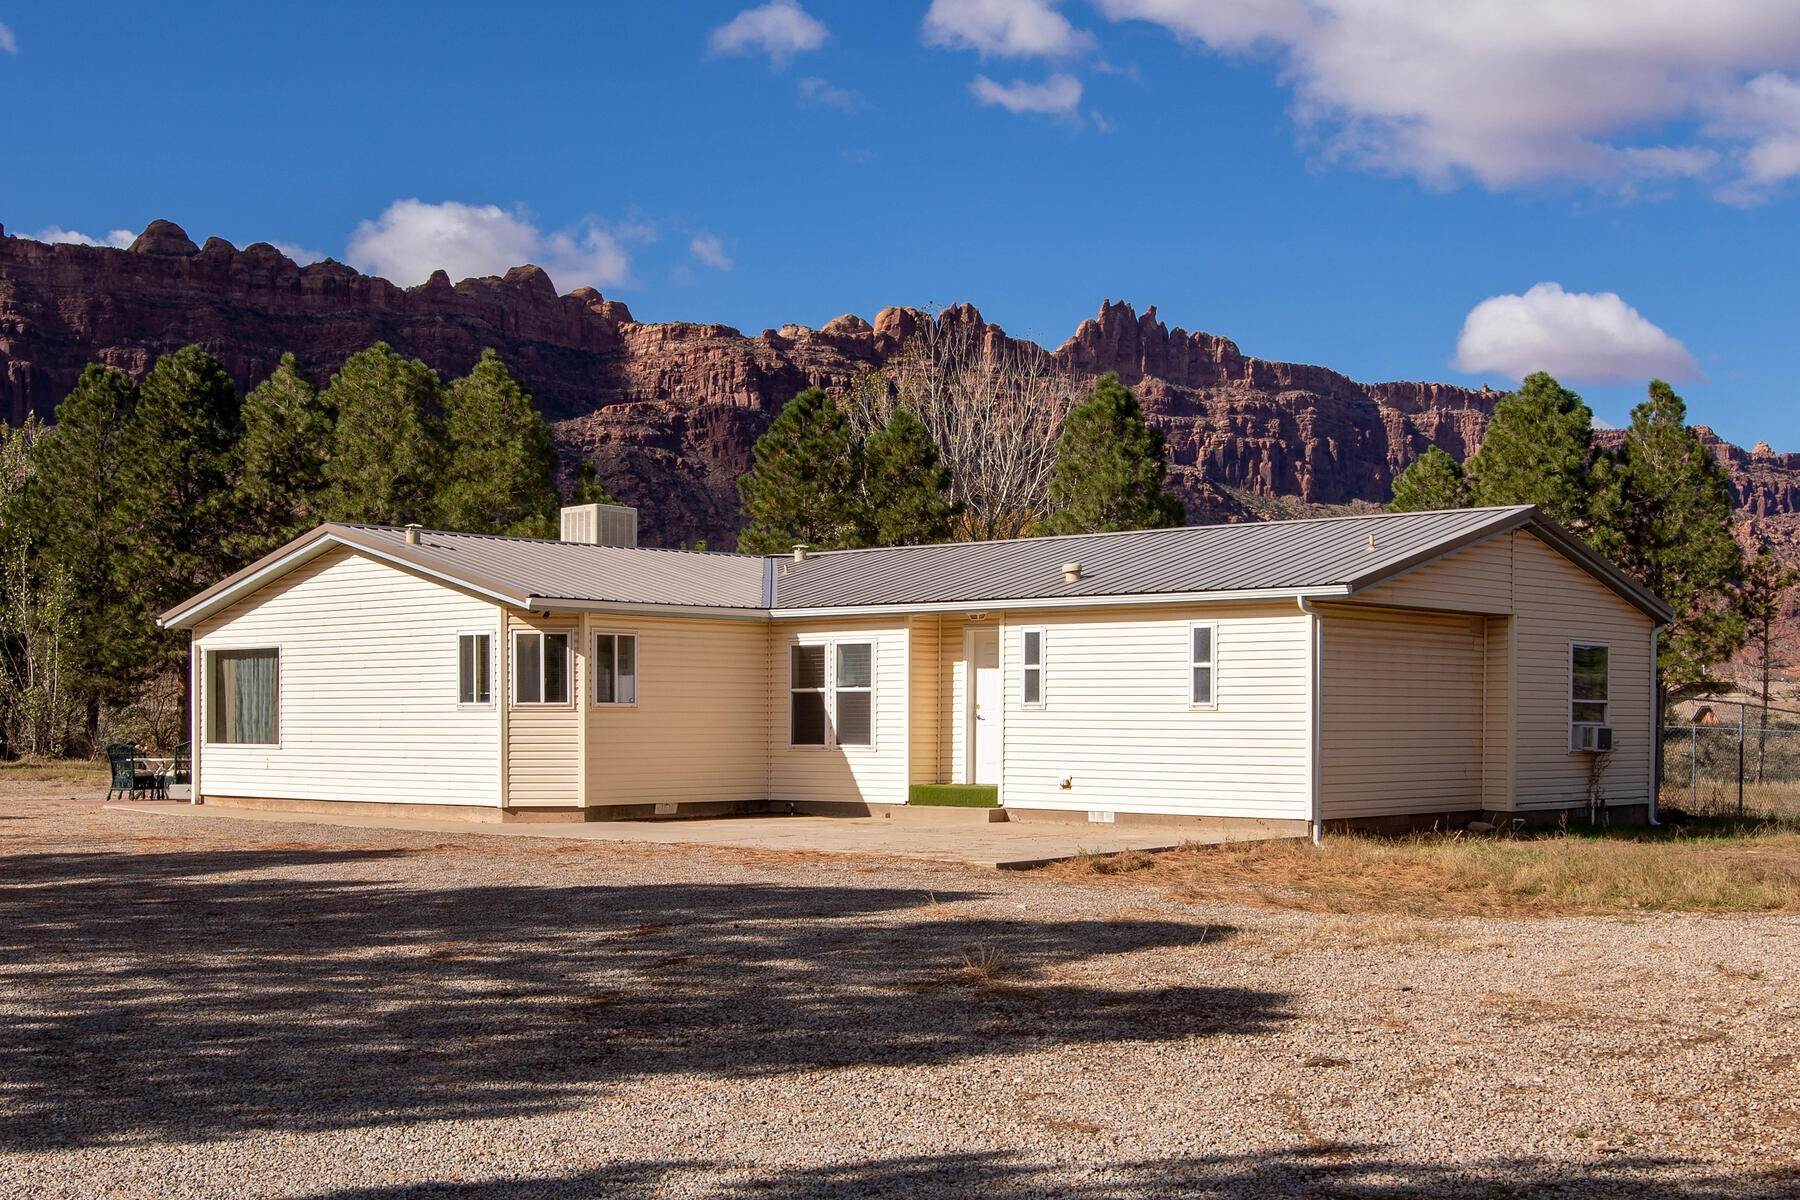 Property for Sale at Surrounded by Perfect Views of the Red Rocks and LaSal Mountains 4060 Spanish Valley Drive Moab, Utah 84532 United States